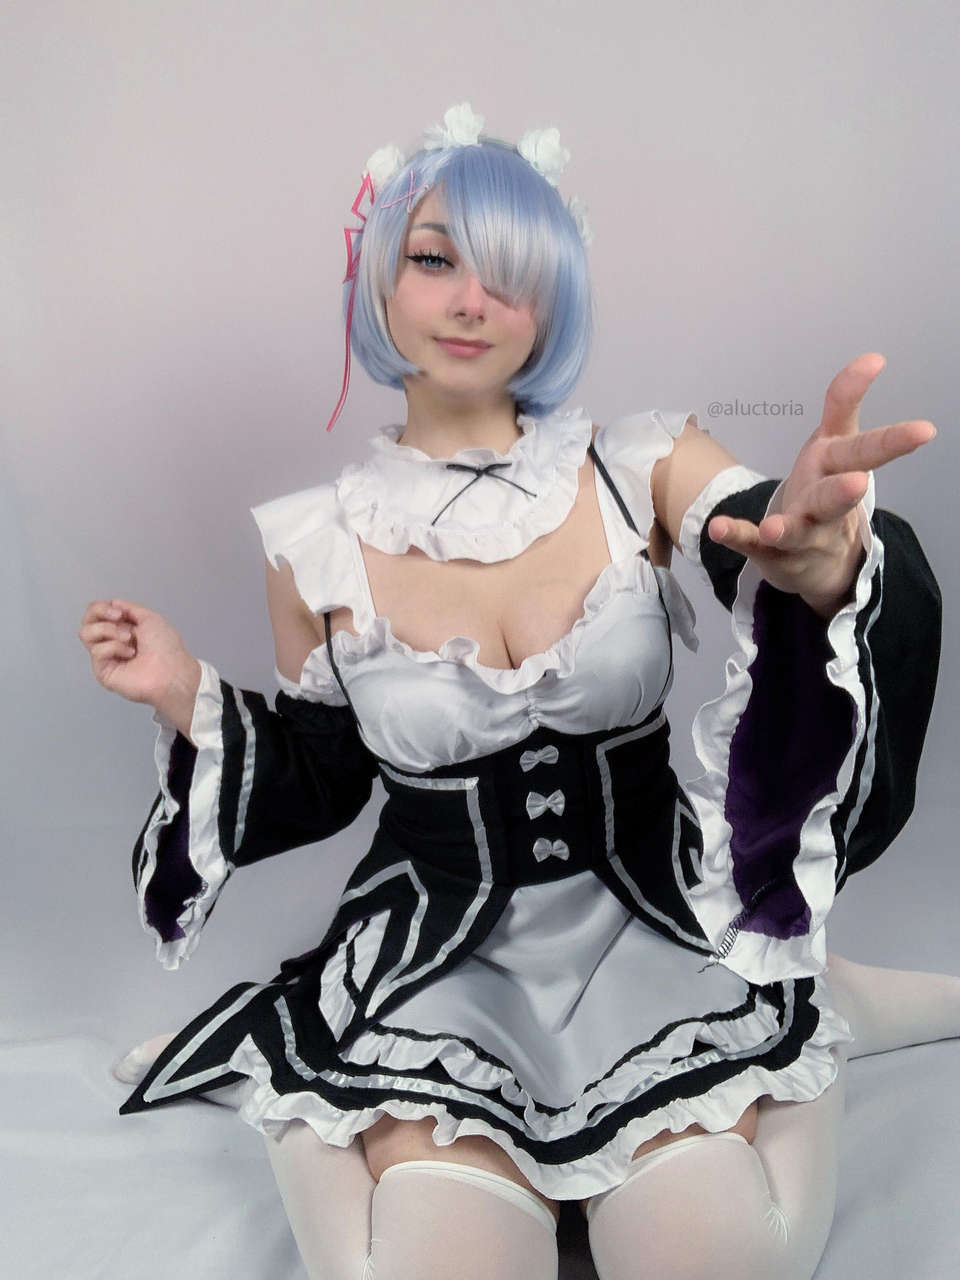 Rem Cosplay By Me Aluctori